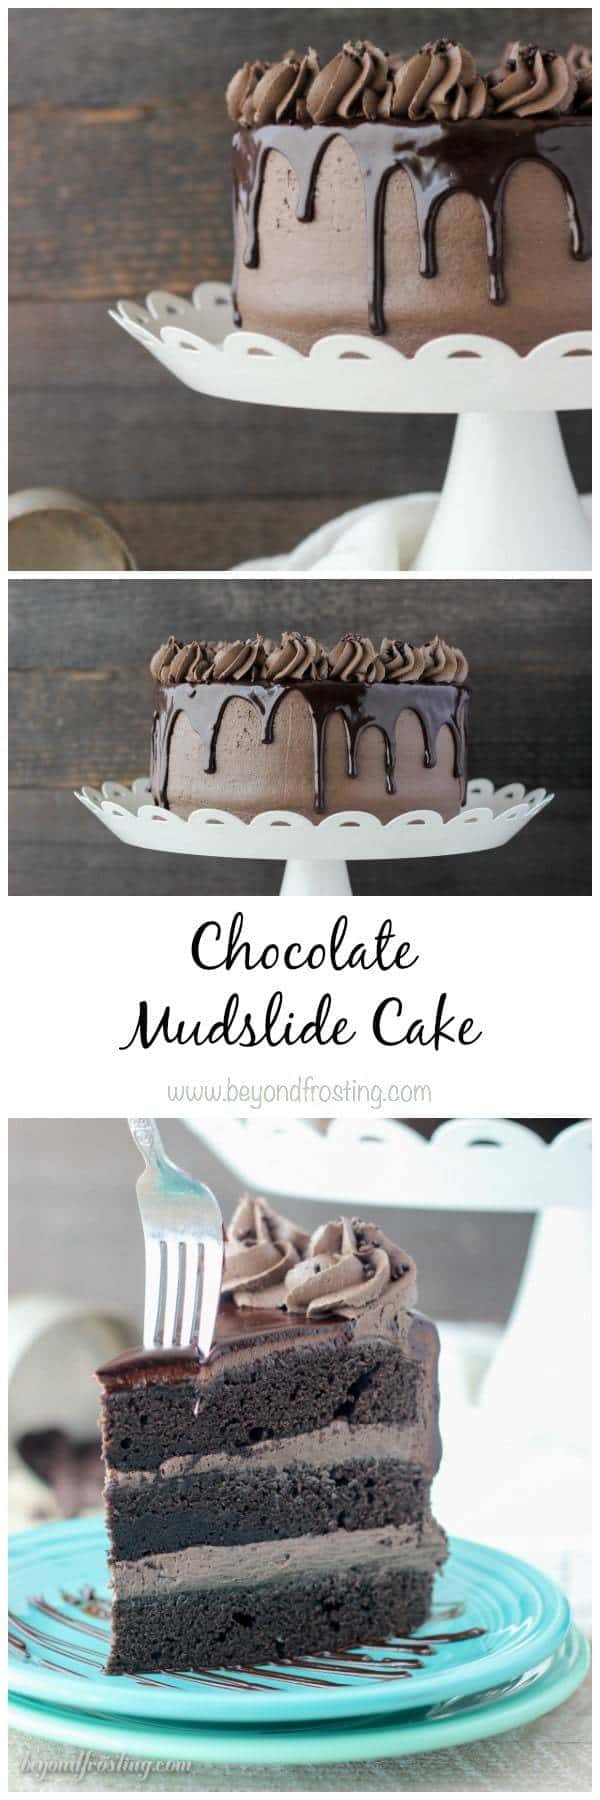 This Chocolate Mudslide Cake is loaded with chocolate, Kahlua and Bailey’s Irish Cream. The decadent chocolate cake is covered with a spiked buttercream and covered with ganache. You’d be surprised how easy this cake recipe is. 